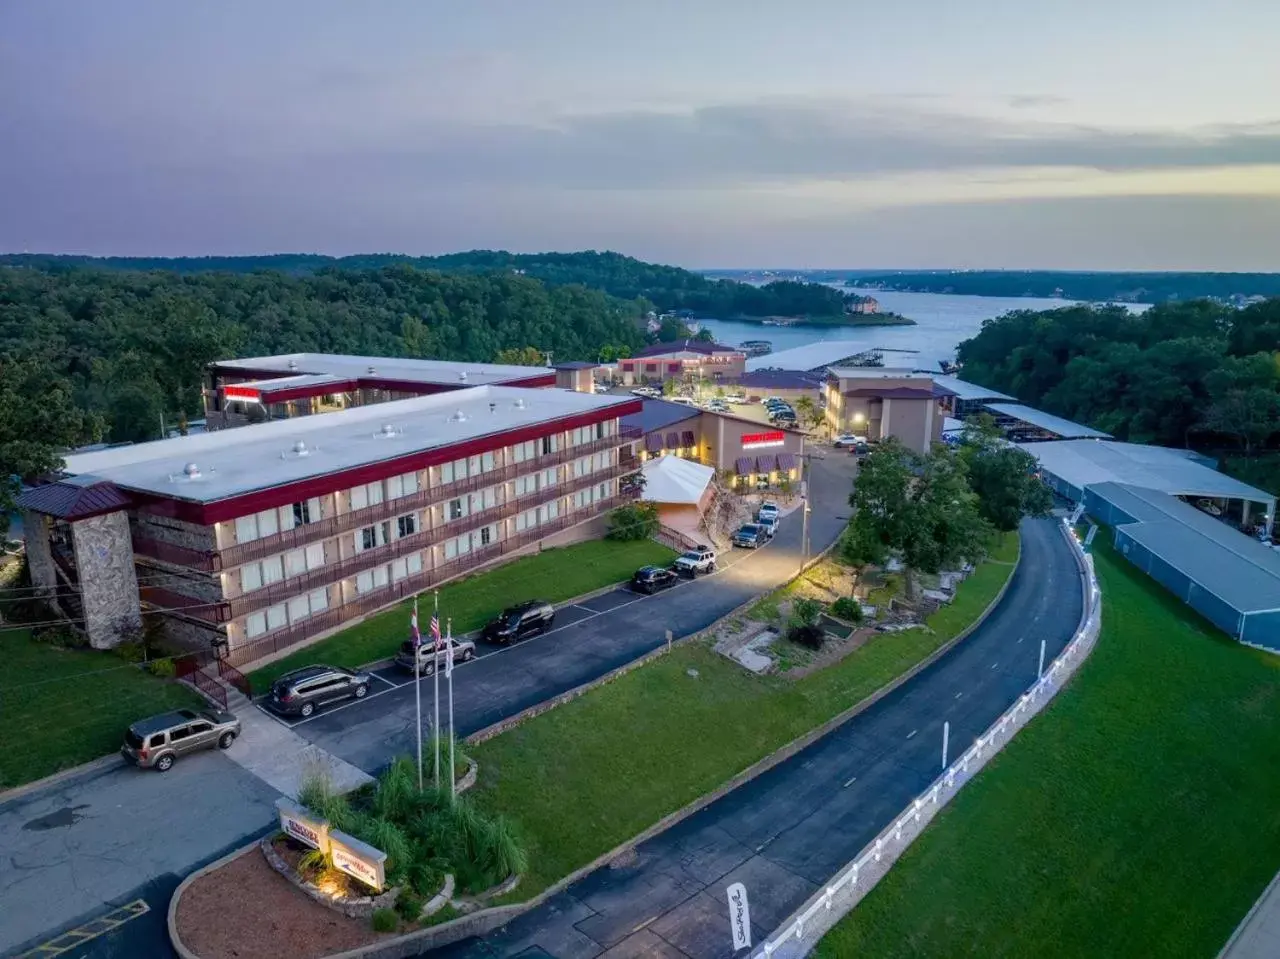 Property building, Bird's-eye View in The Resort at Lake of the Ozarks